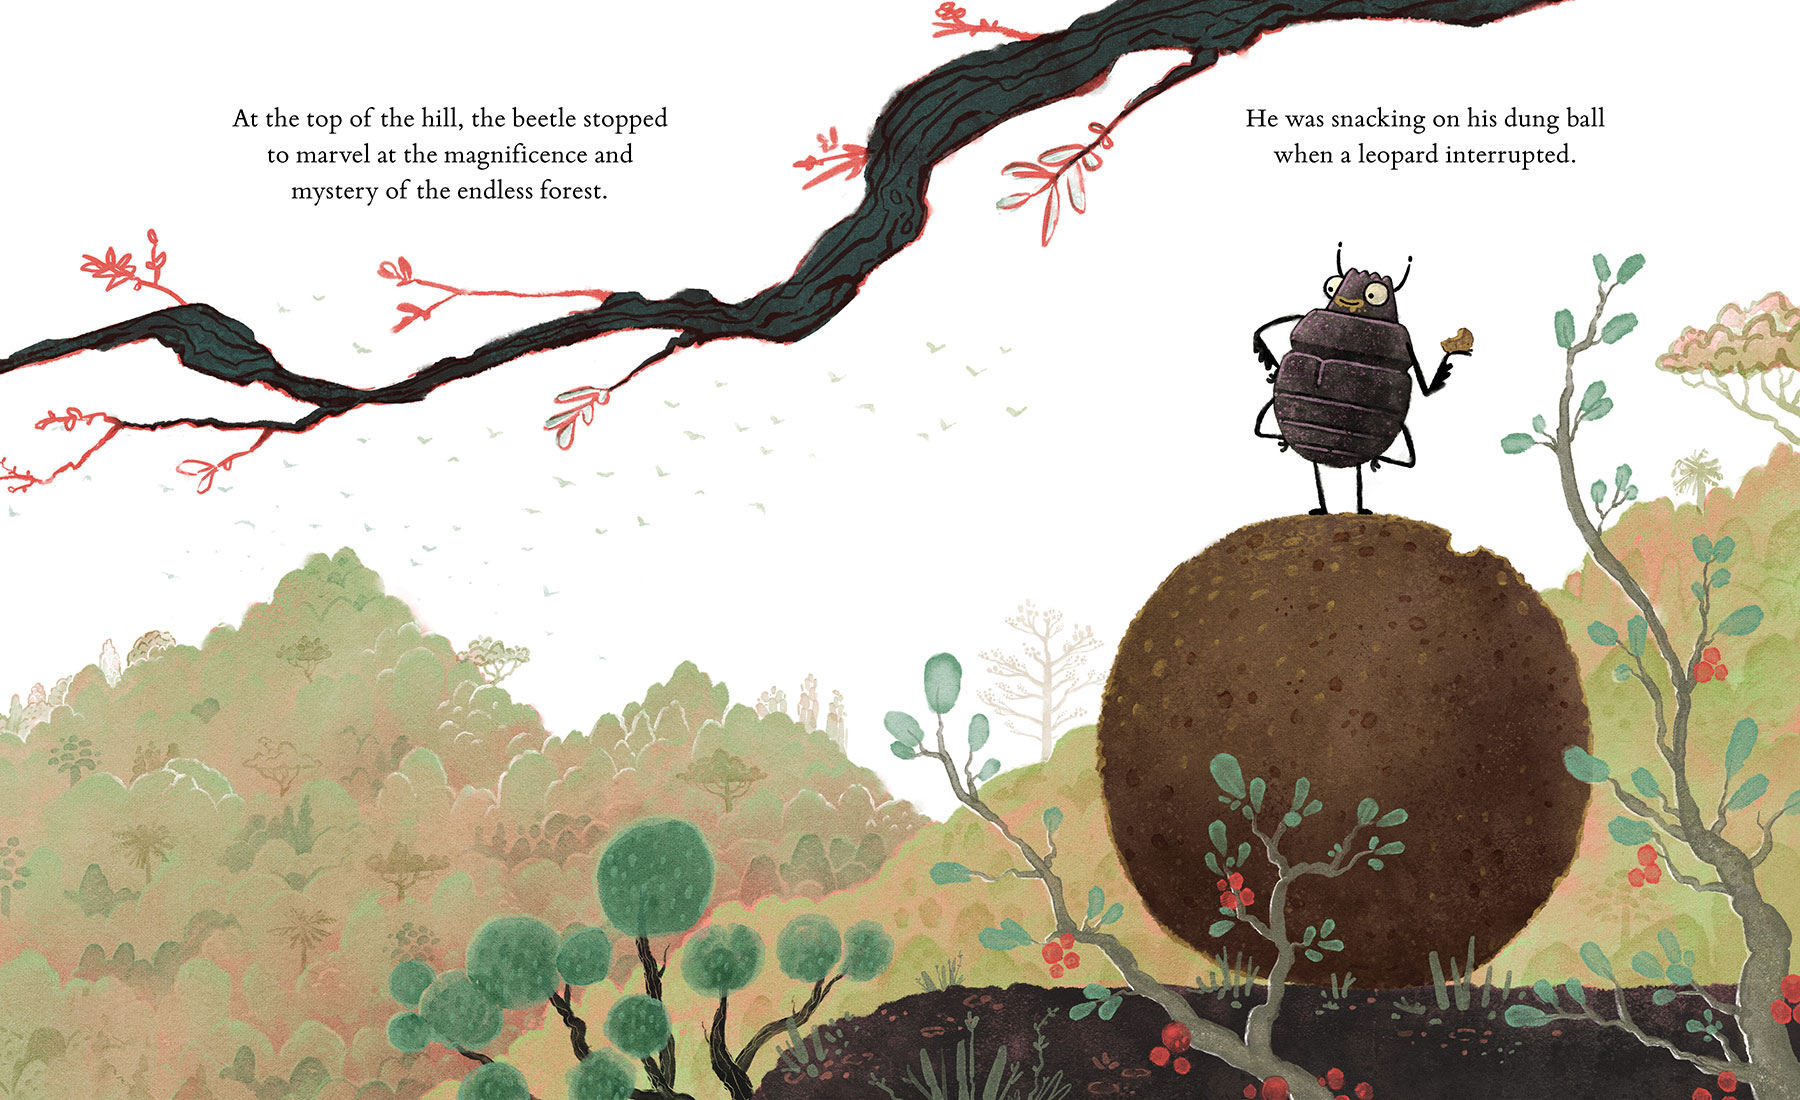 Colorful illustration of a dung beetle sitting on top of his giant dung ball